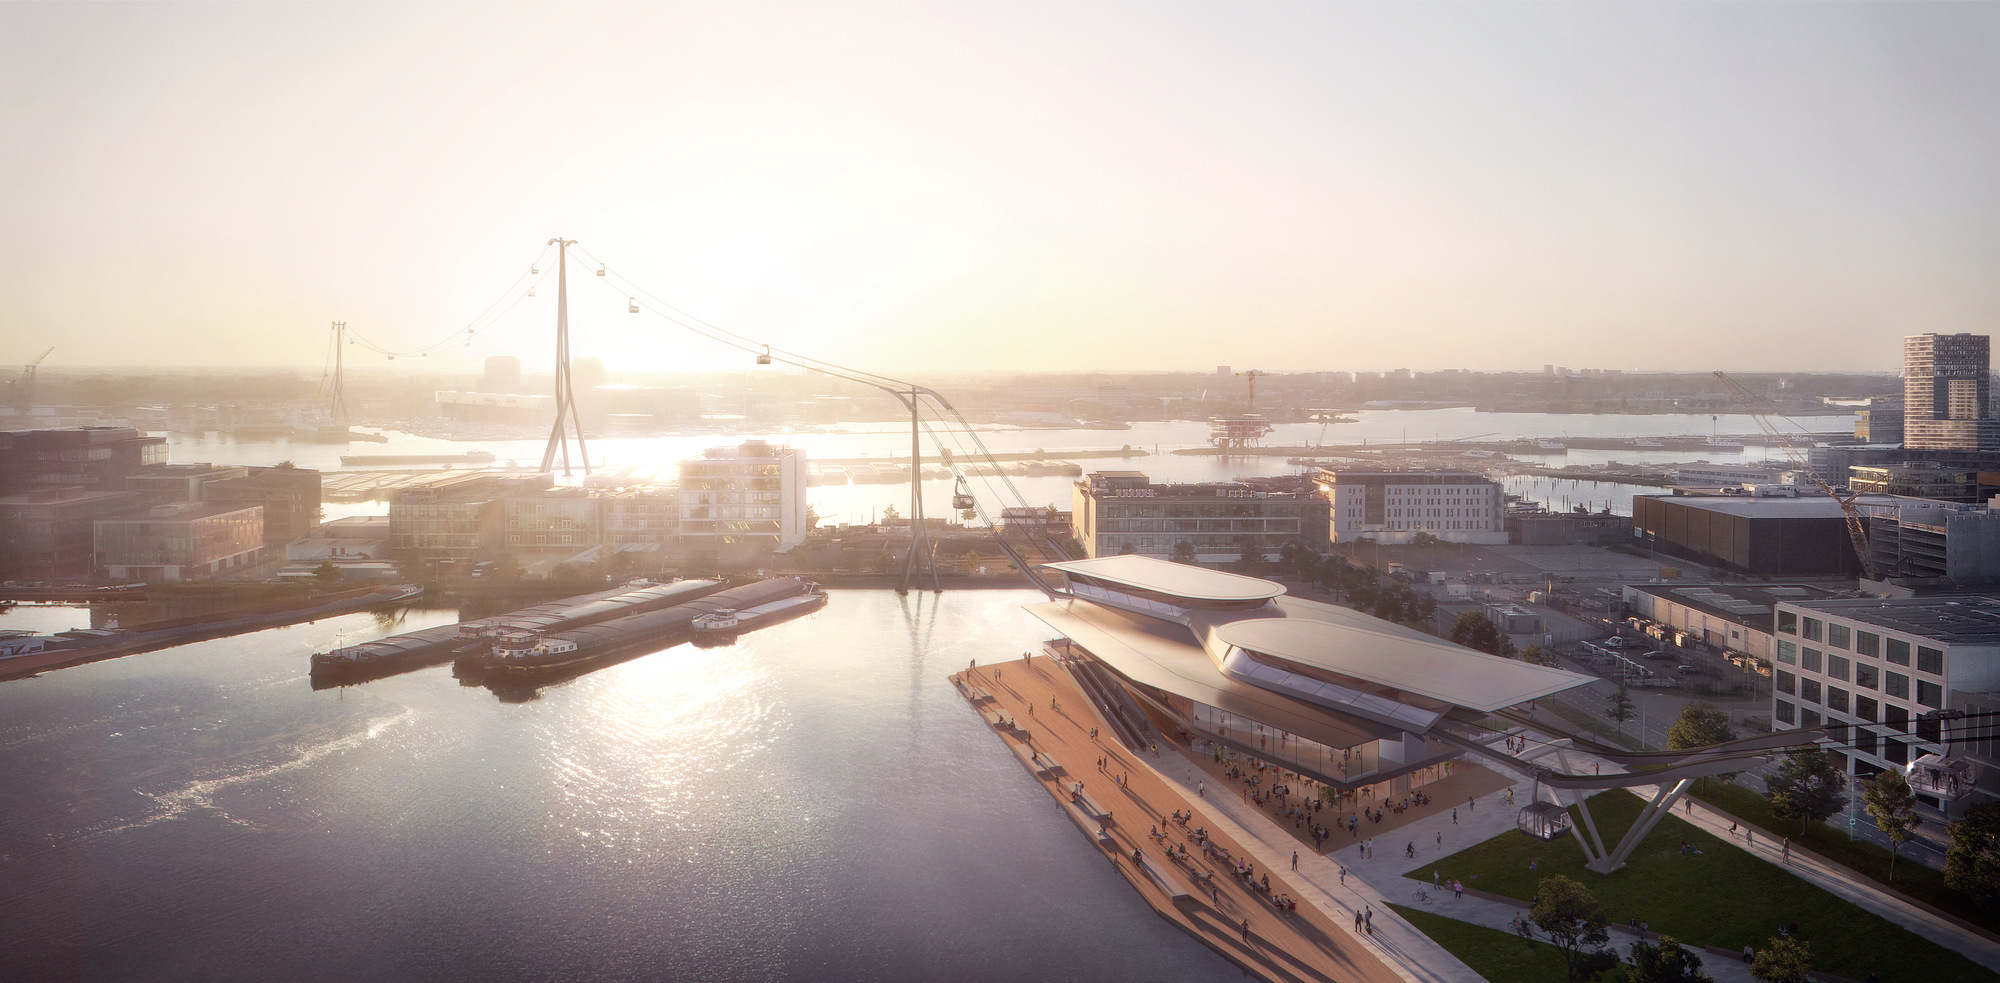 Amsterdam City Council Gives Support for IJbaan Cable Car